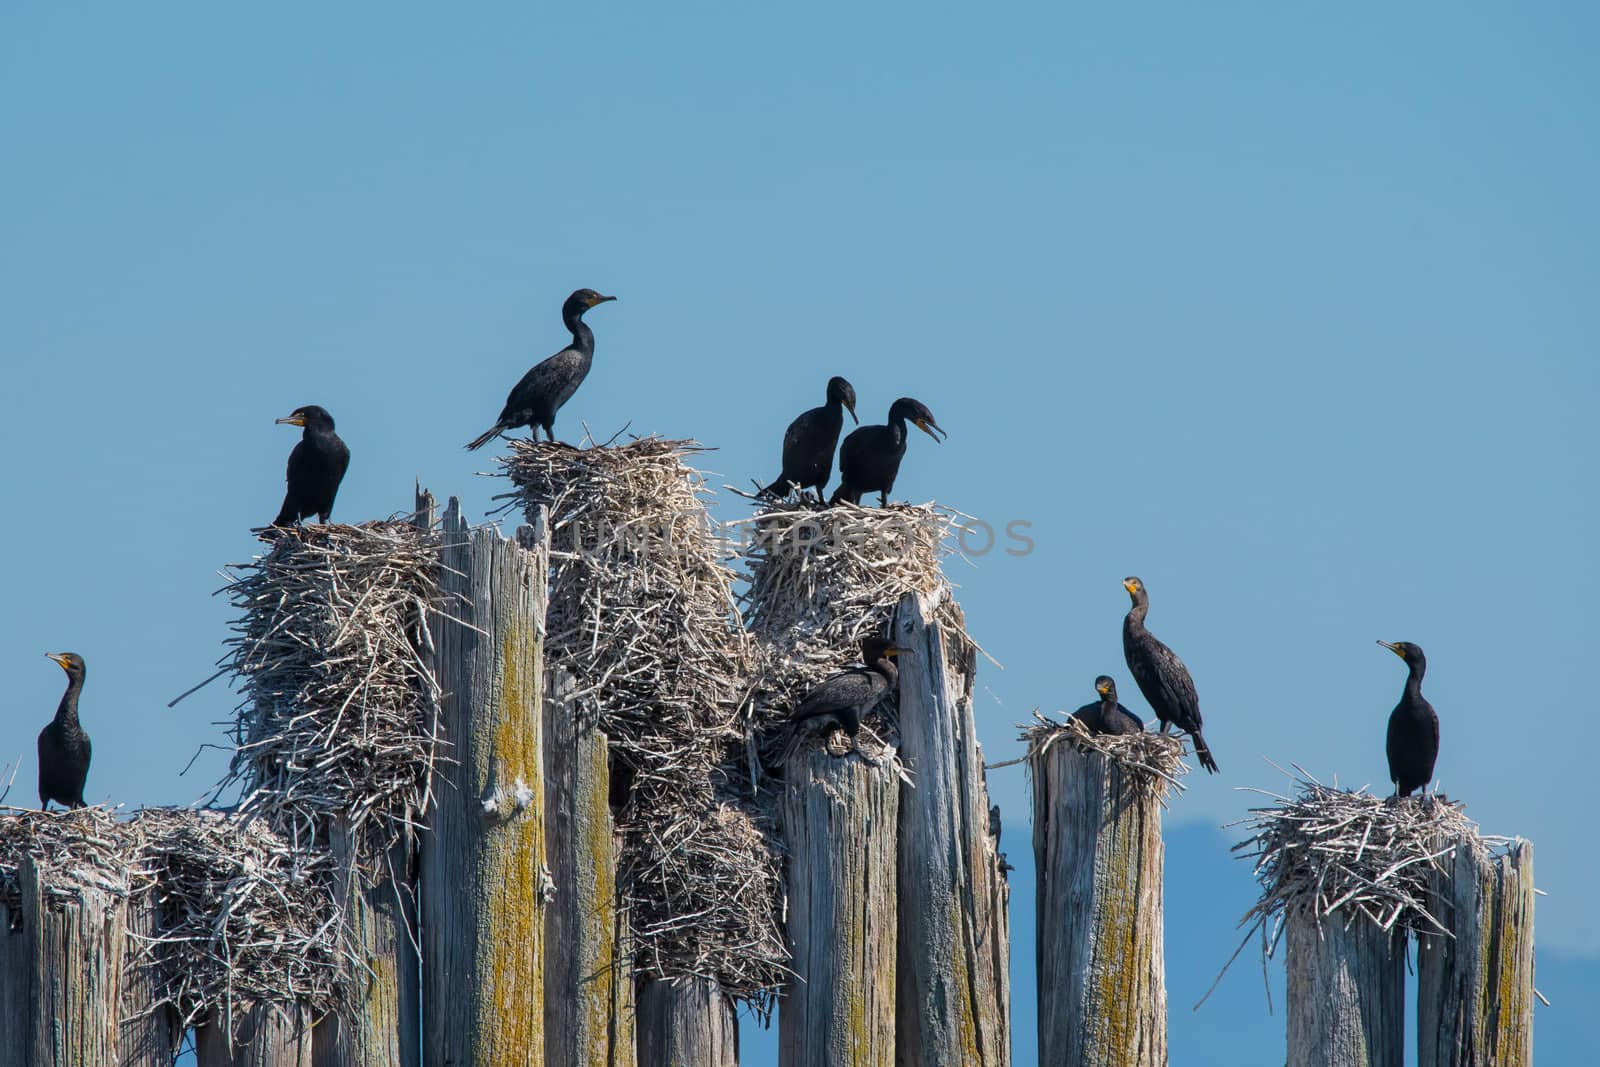 These cormorants can always be found nesting and roosting on these pilings in Steamboat Slough, Everett, WA